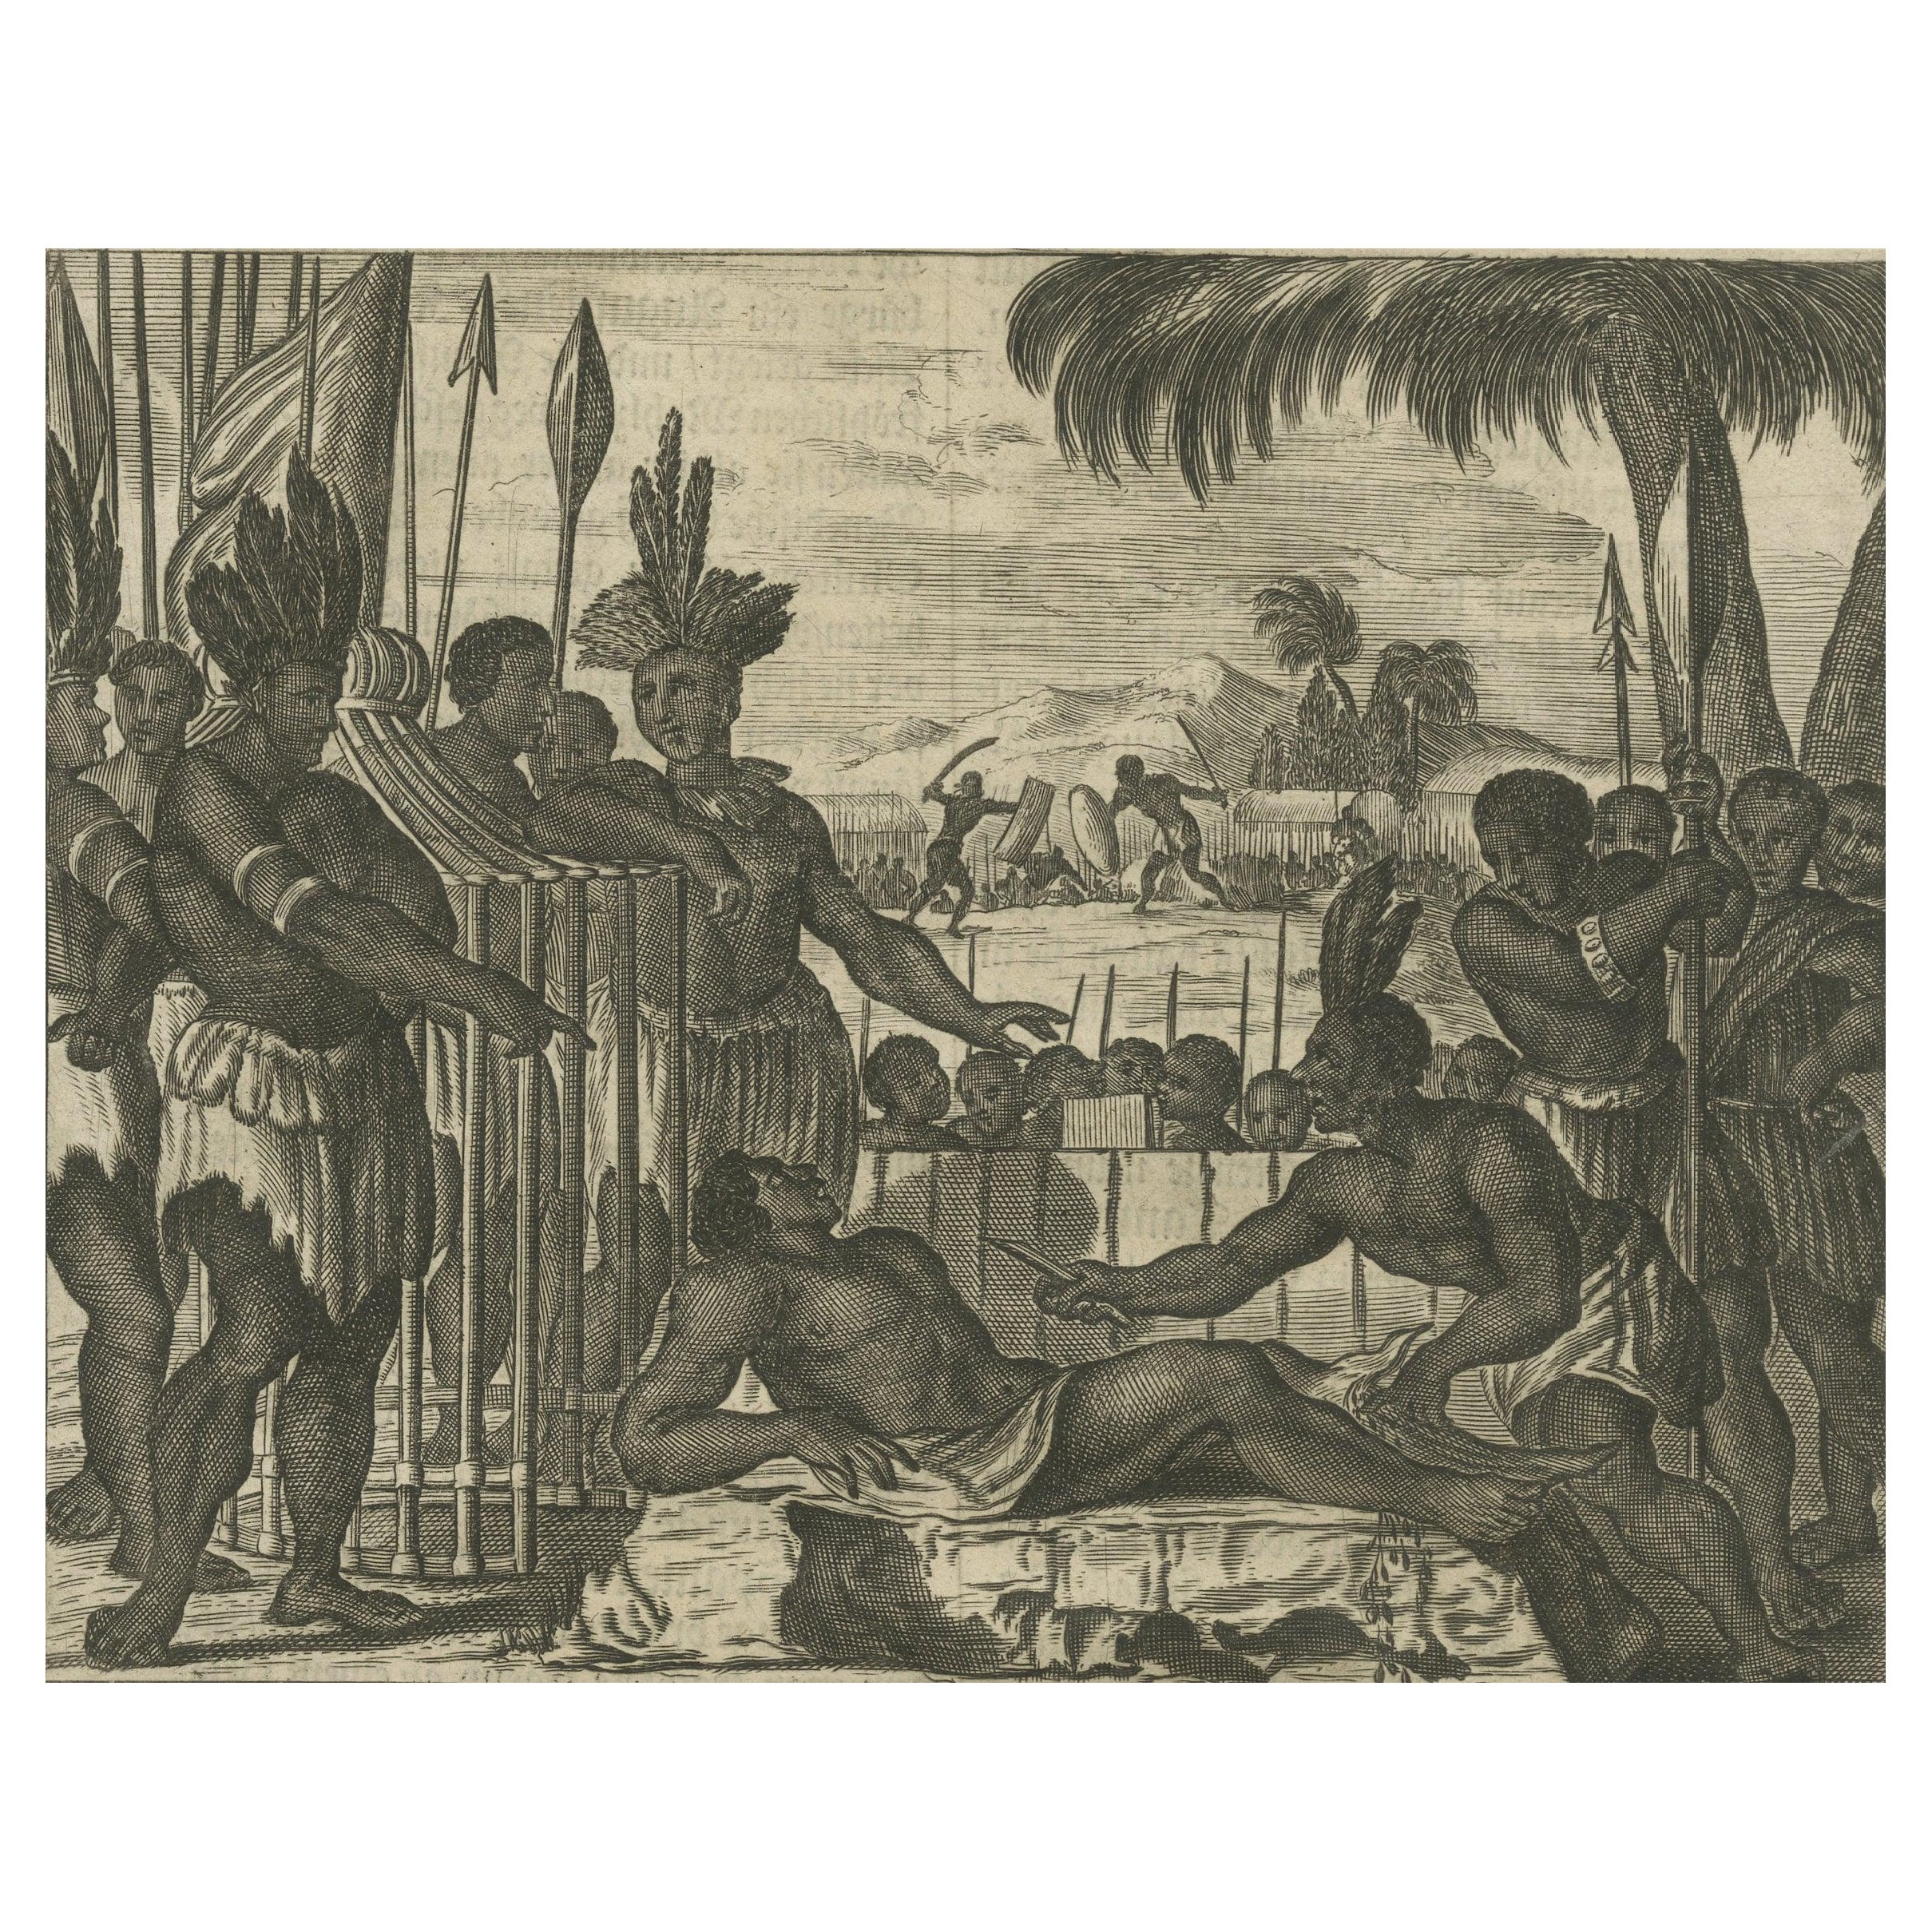 Copper Engraving of Ceremonial Life in New Spain by Montanus, 1673